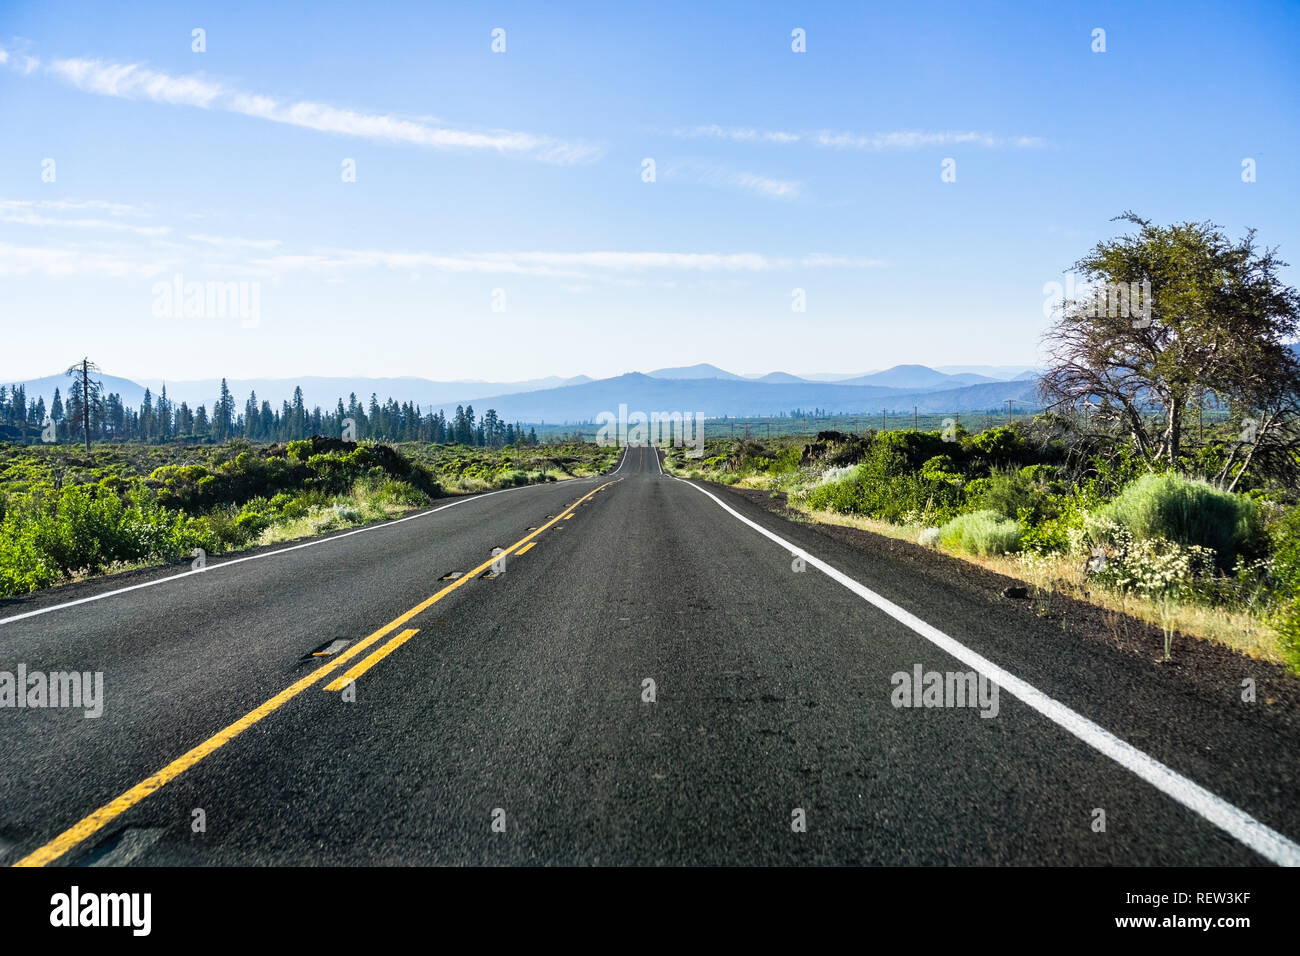 Driving on a straight, empty road in Shasta County, Northern California Stock Photo